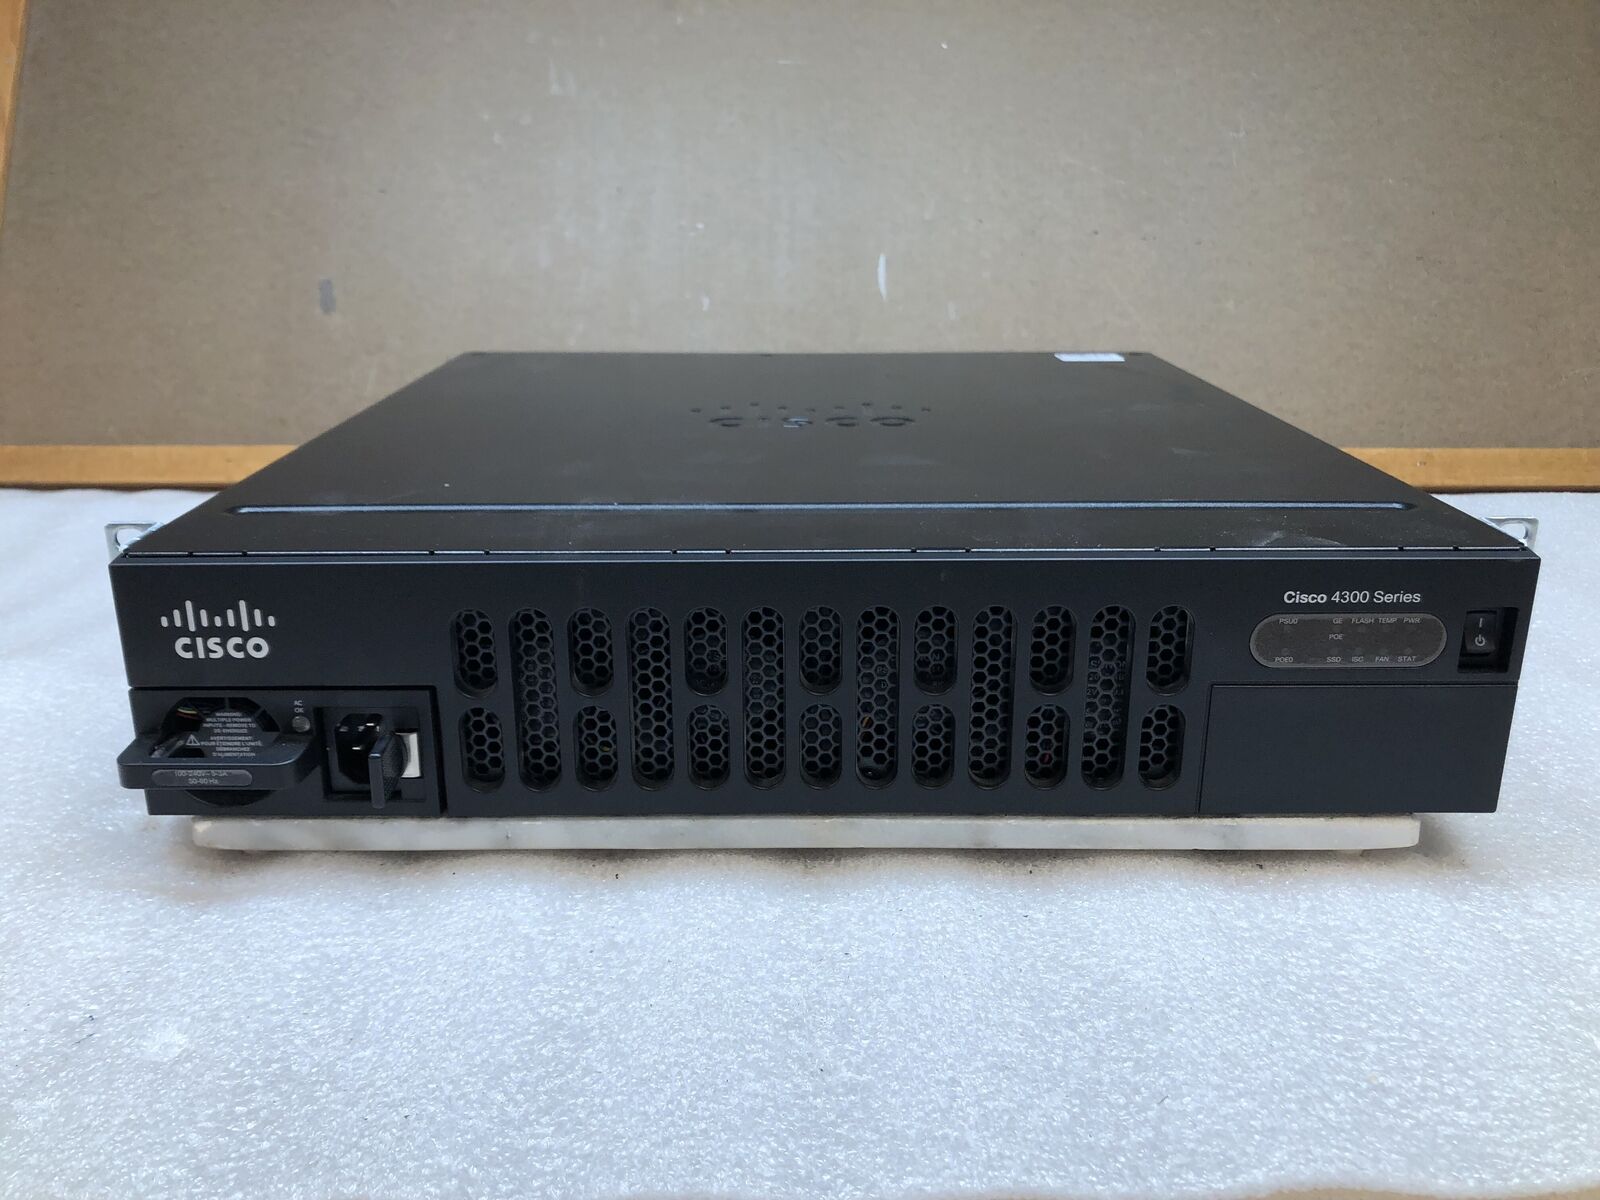 Cisco ISR4351/K9 Gigabyte Integrated Services Router 1x PSU